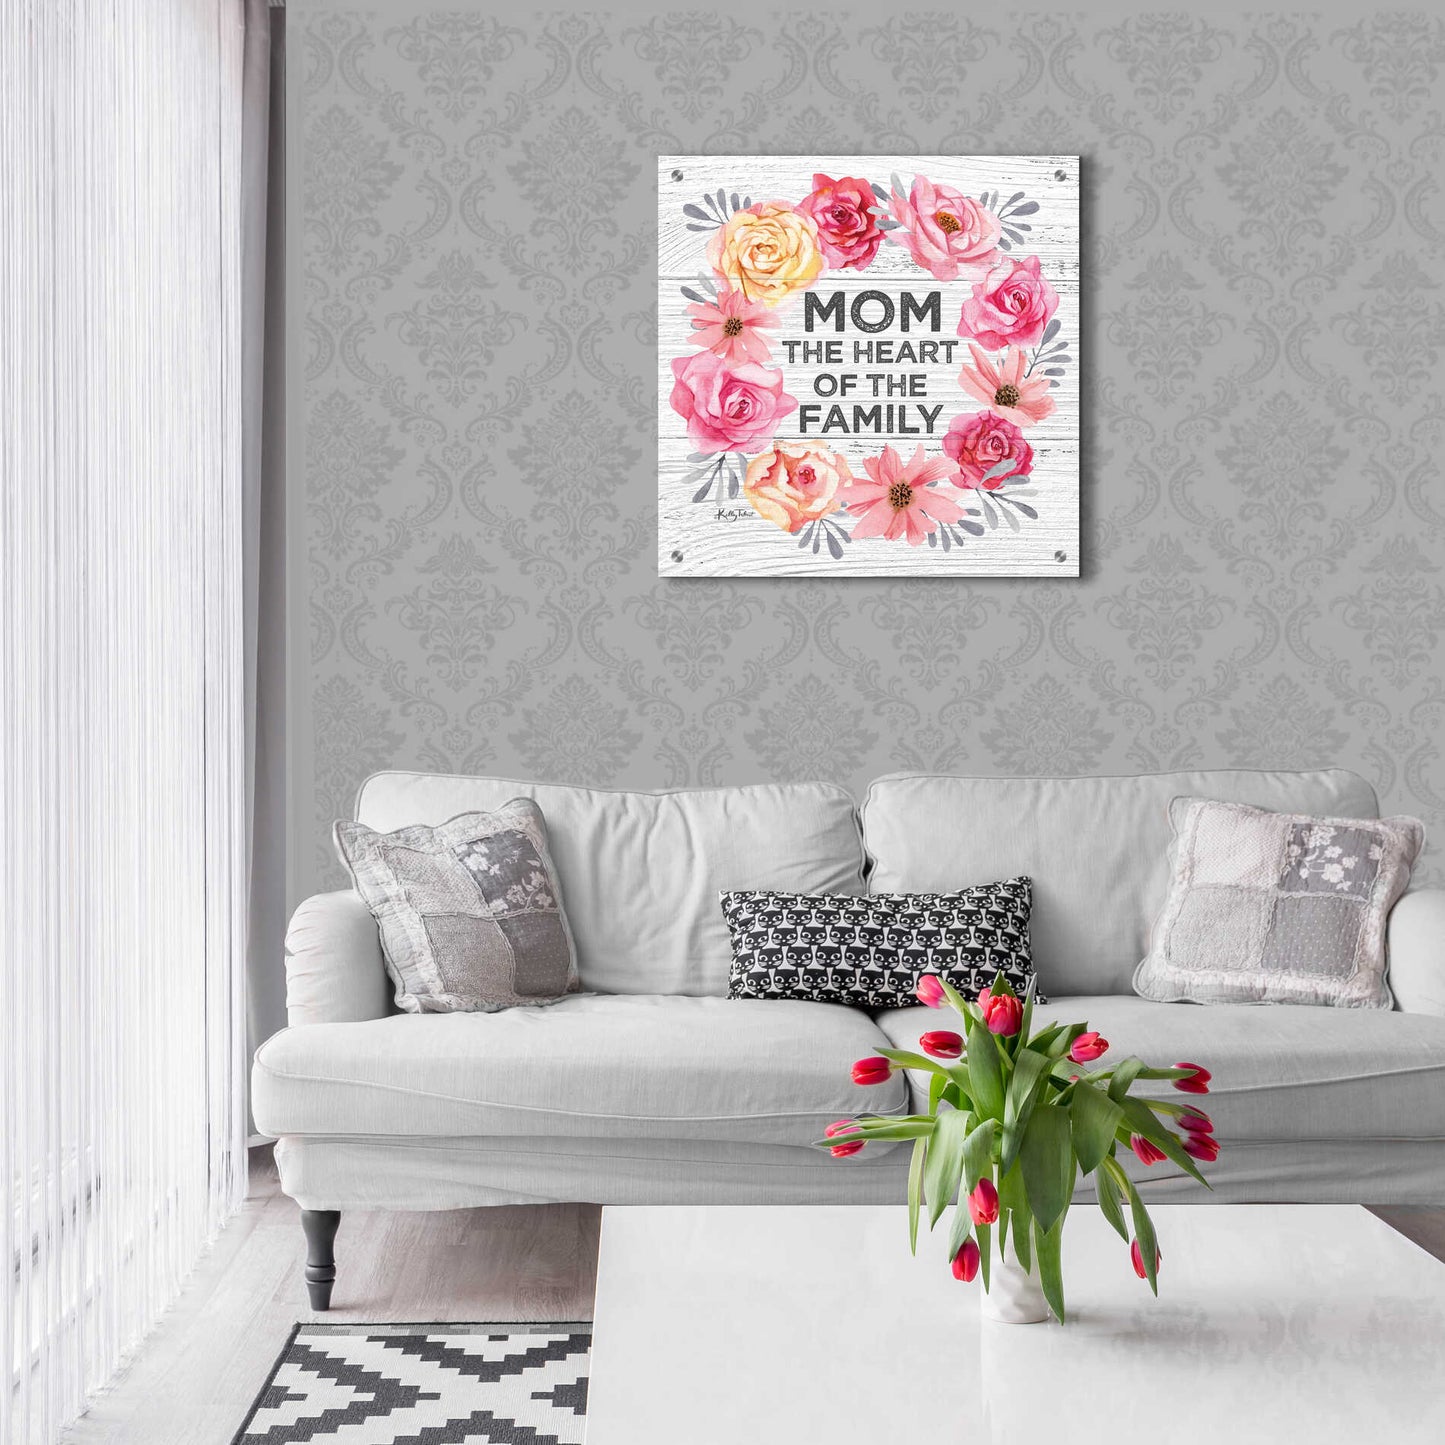 Epic Art 'Mom - the Heart of the Family' by Kelley Talent, Acrylic Glass Wall Art,24x24